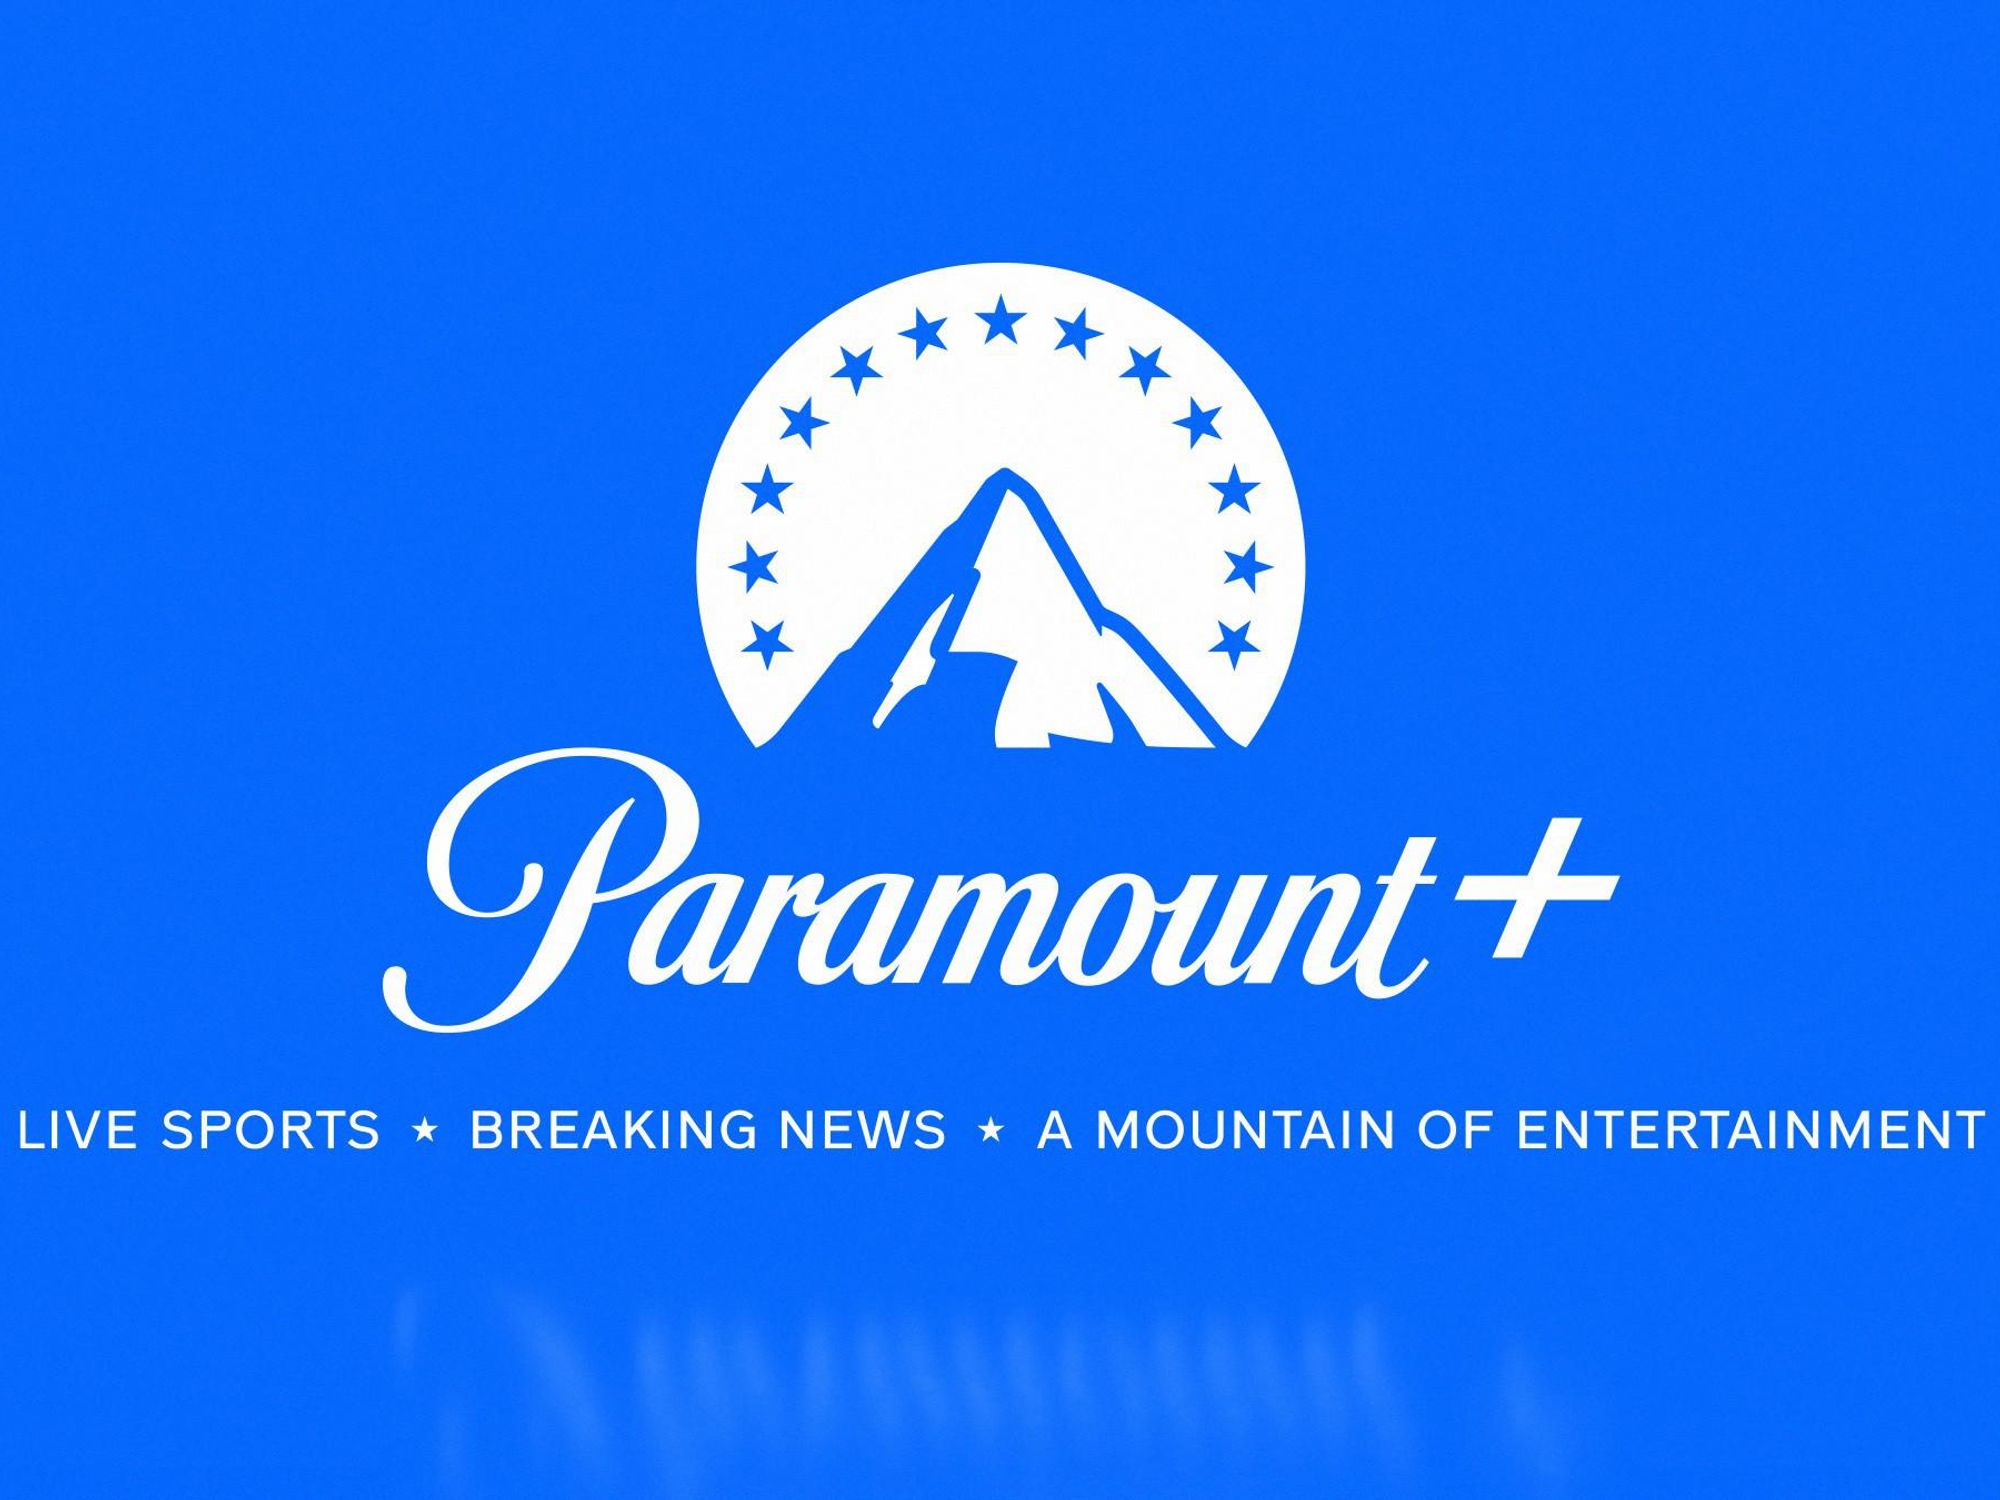 Content Is Still King: ViacomCBS Touts Paramount Plus' Sports, News and Entertainment